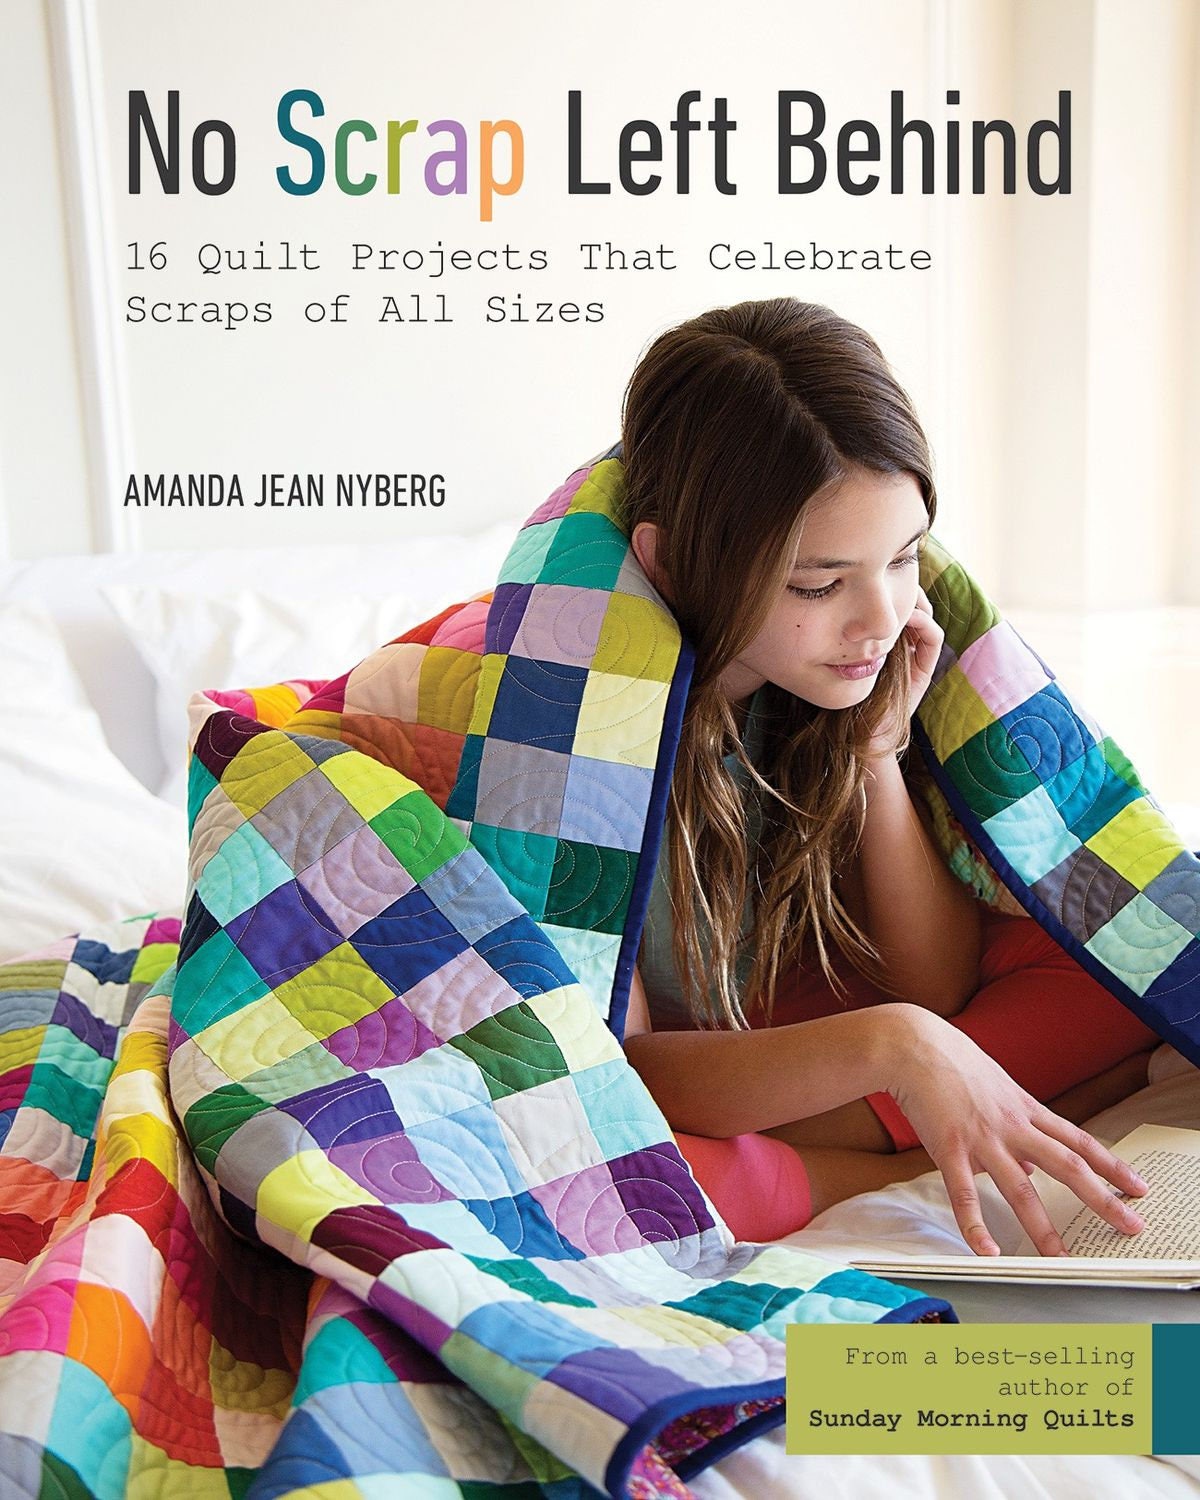 No Scrap Left Behind: 16 Quilt Projects that Celebrate Scraps of All Sizes [Book]